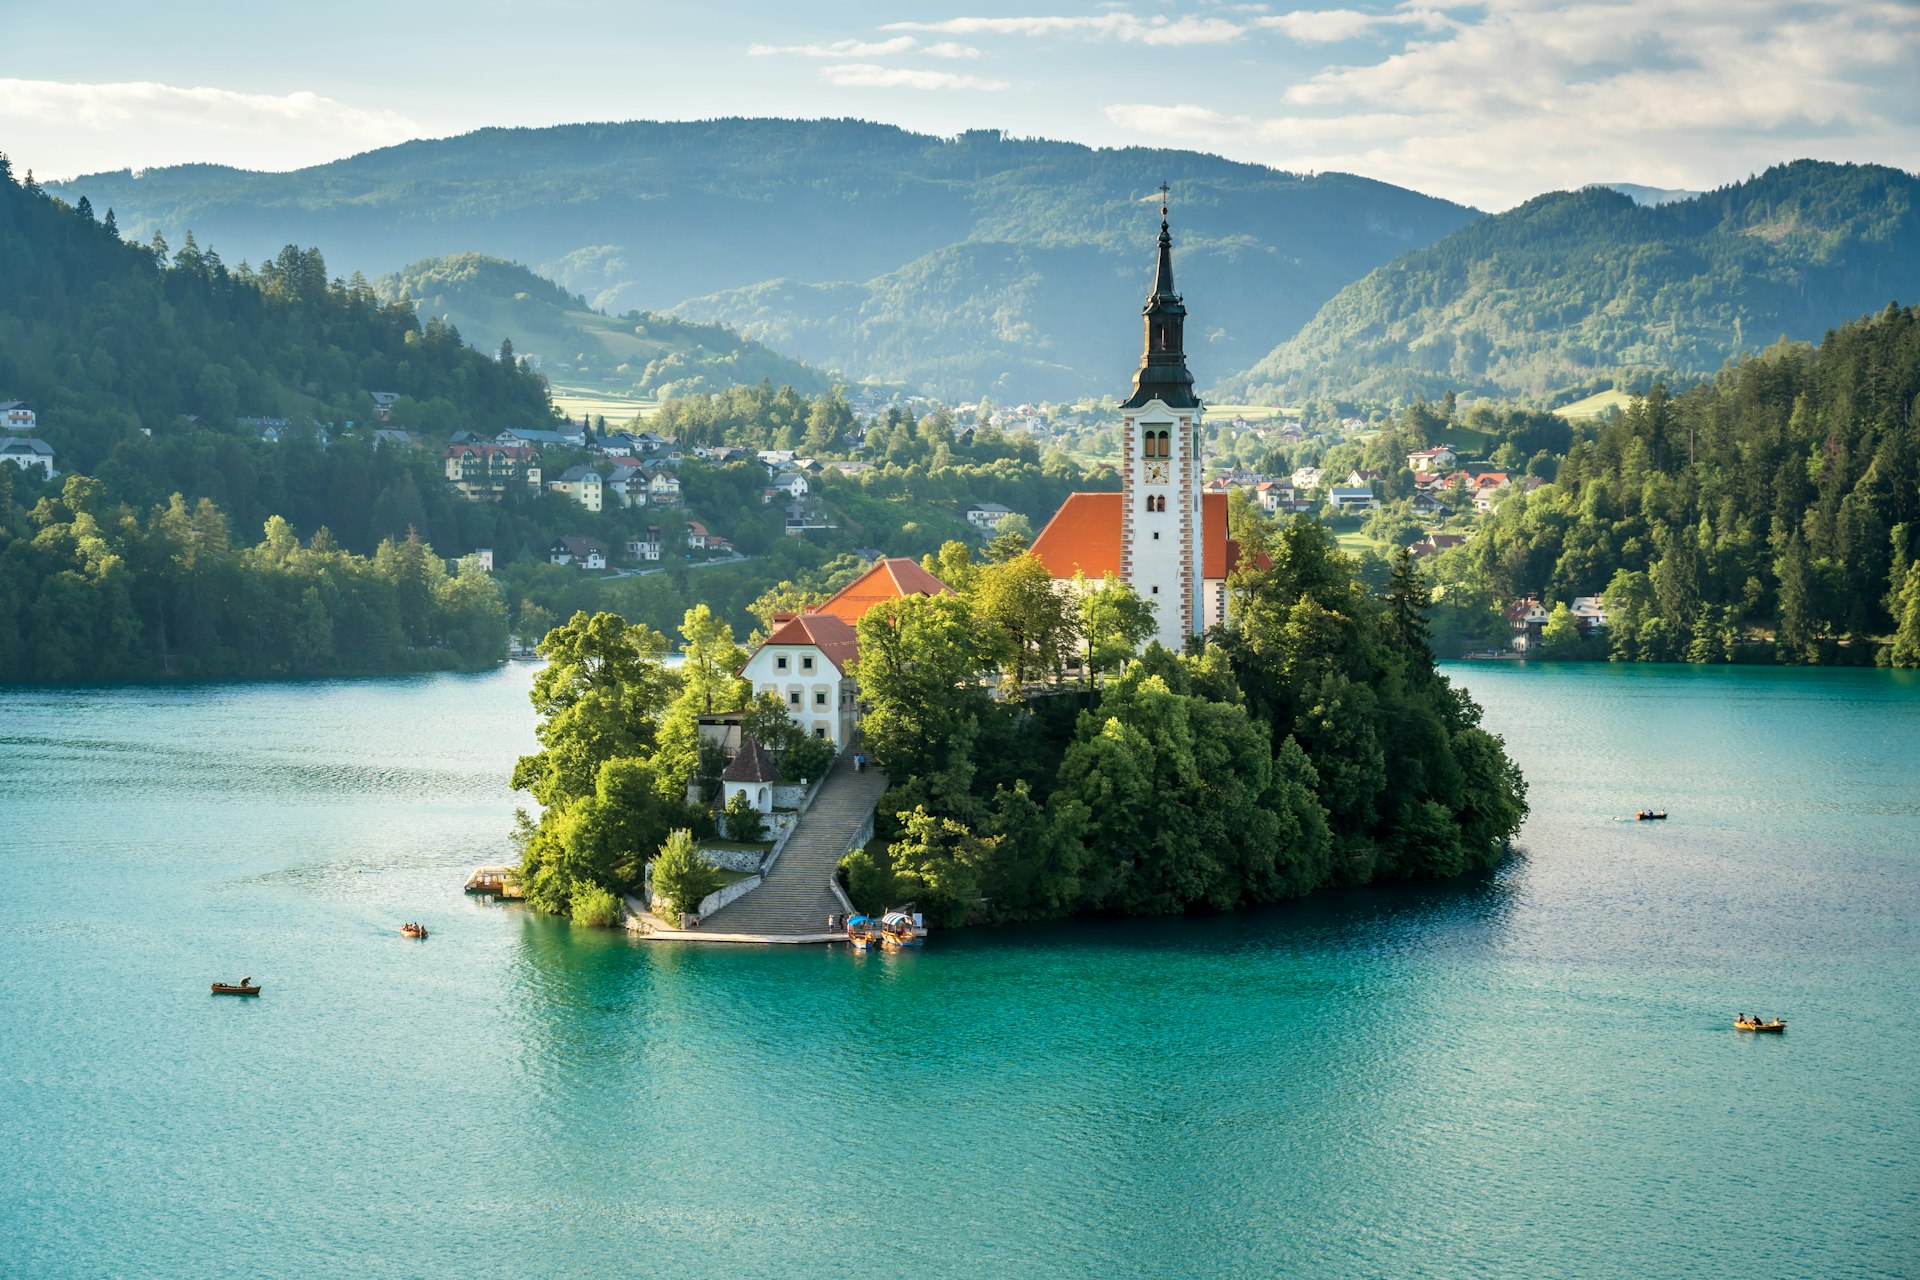 An island with a church in the middle of the turquoise waters of Bohinj Lake 